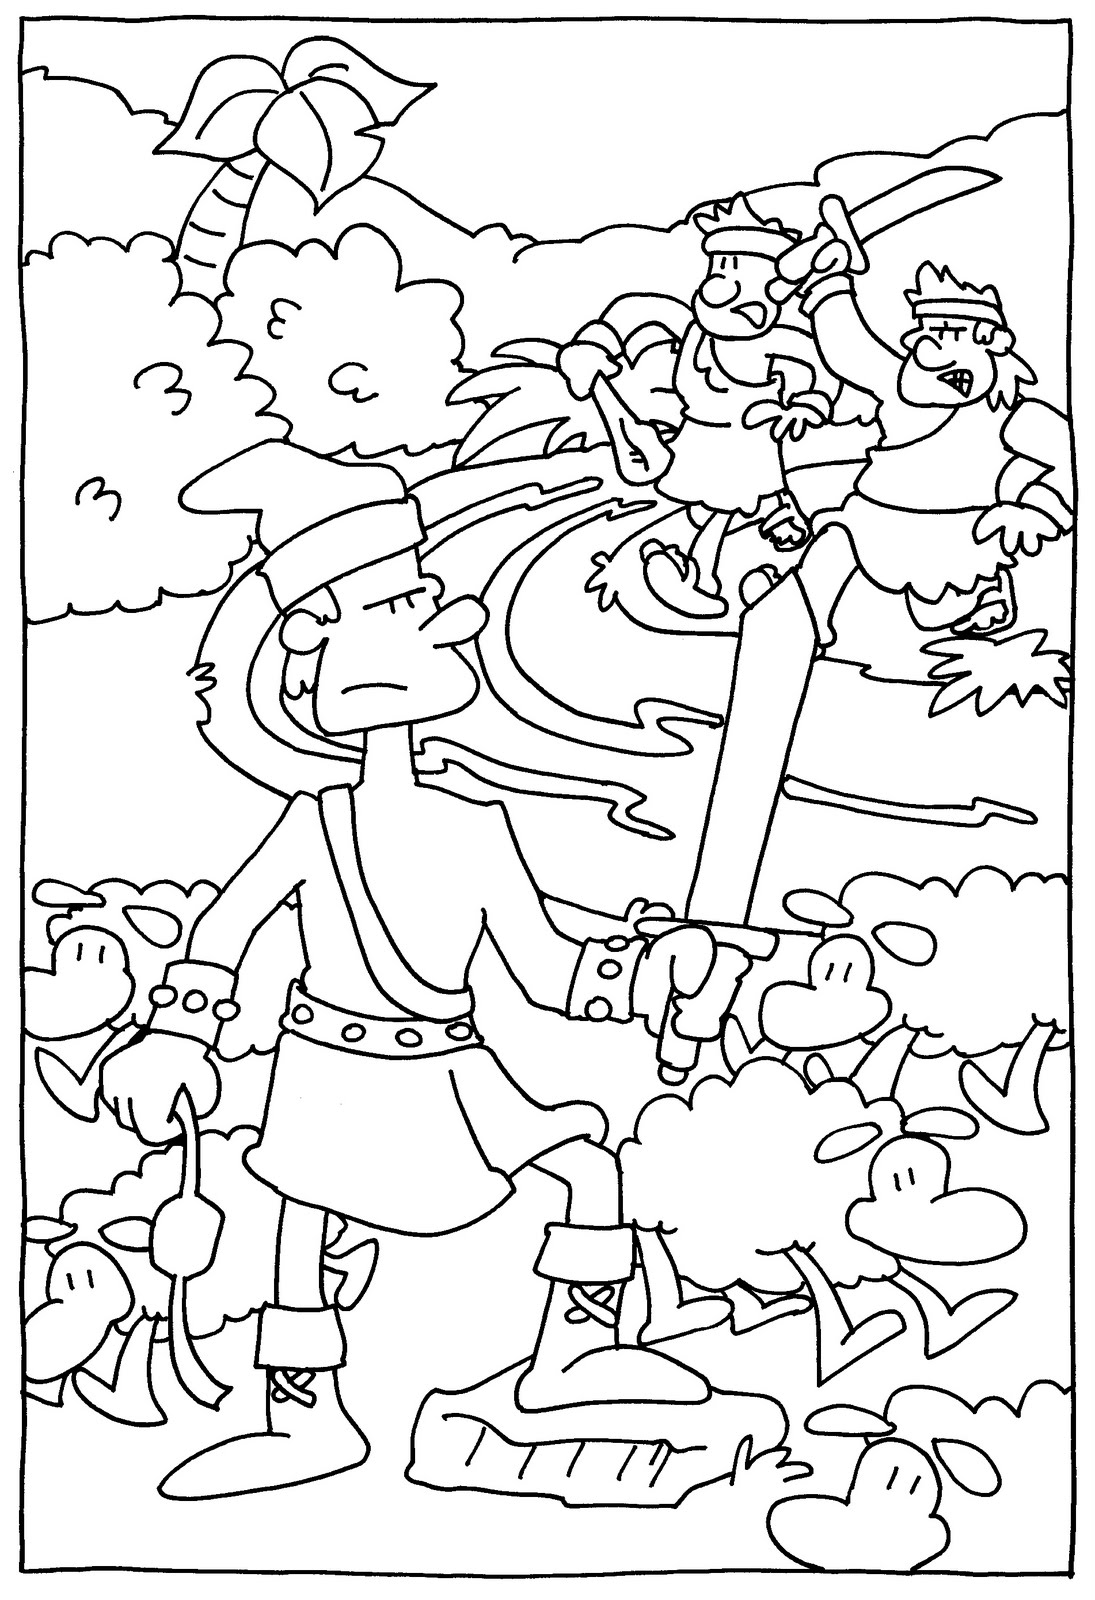 abinadi coloring pages pinterest - photo #9